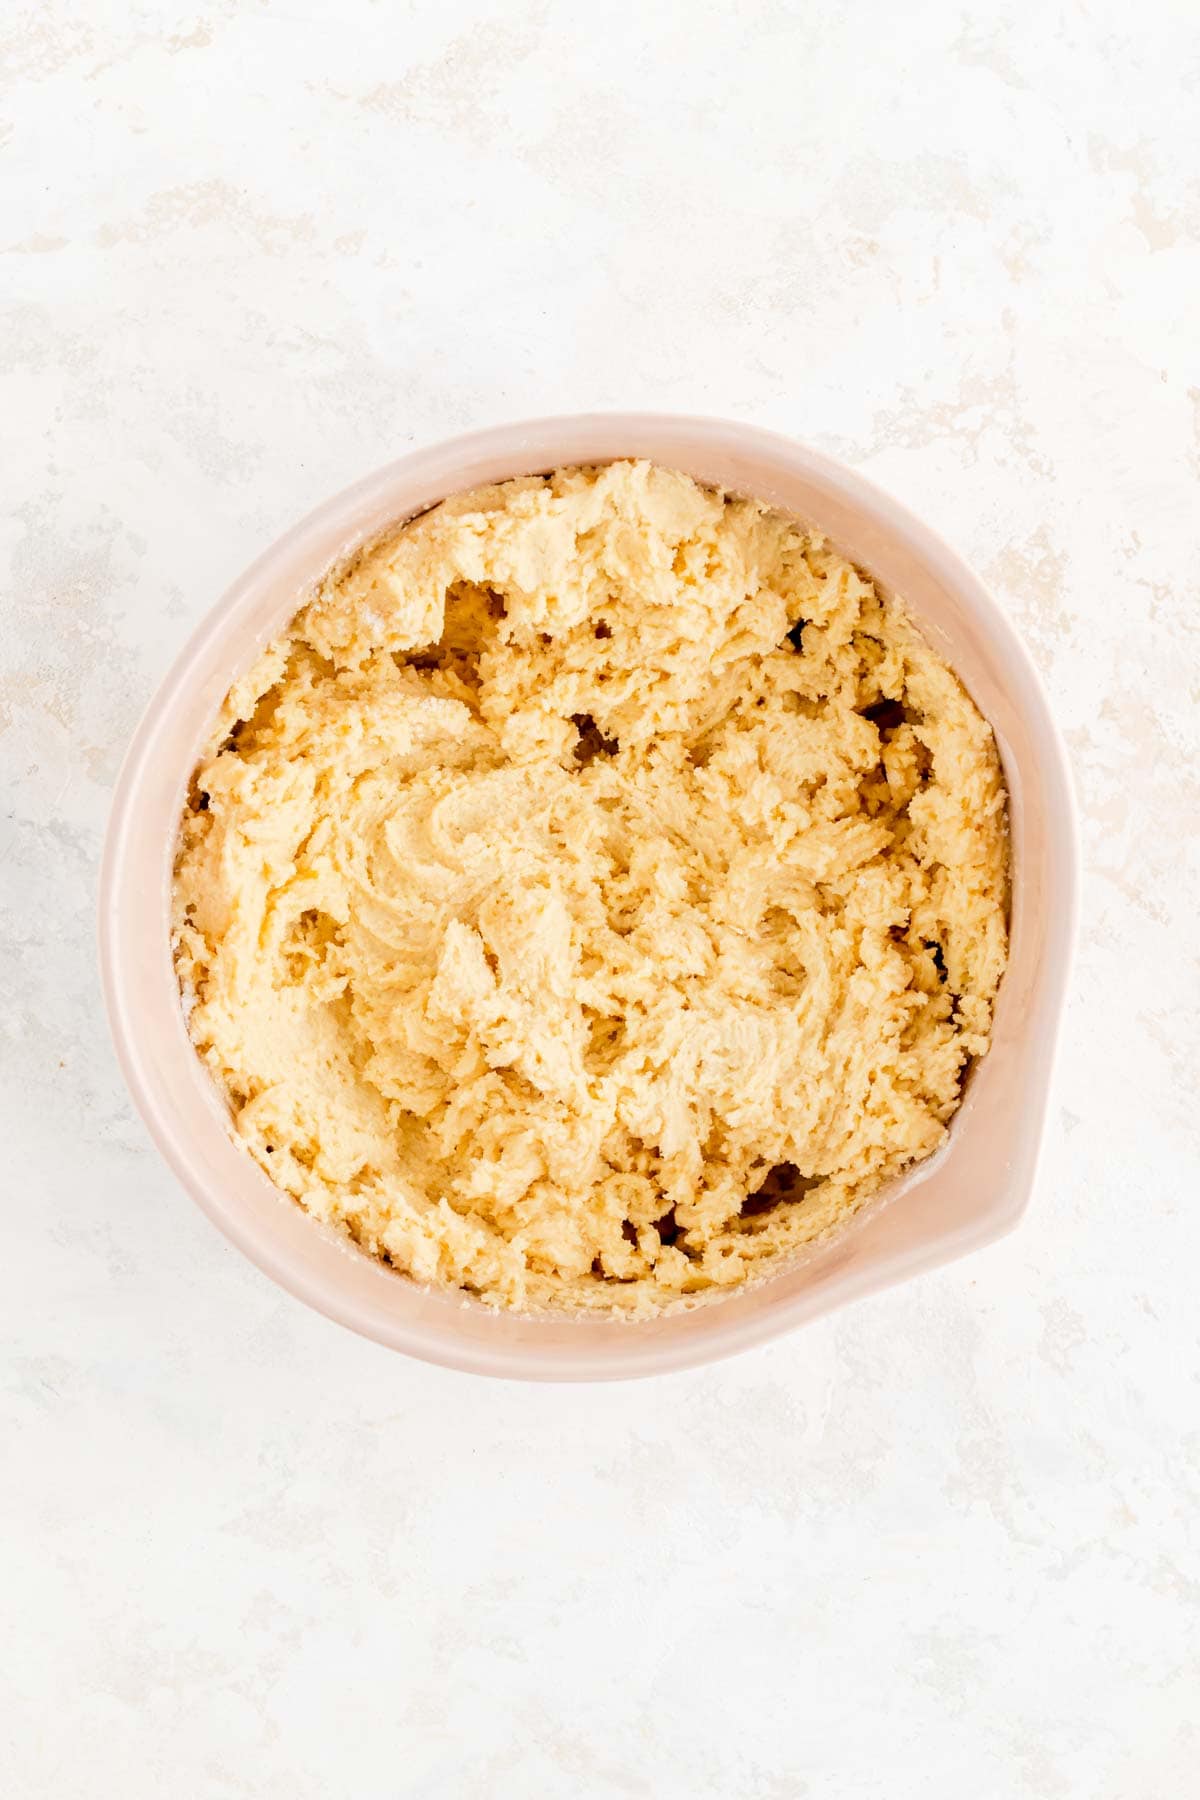 chipless cookie dough in tan bowl on white background